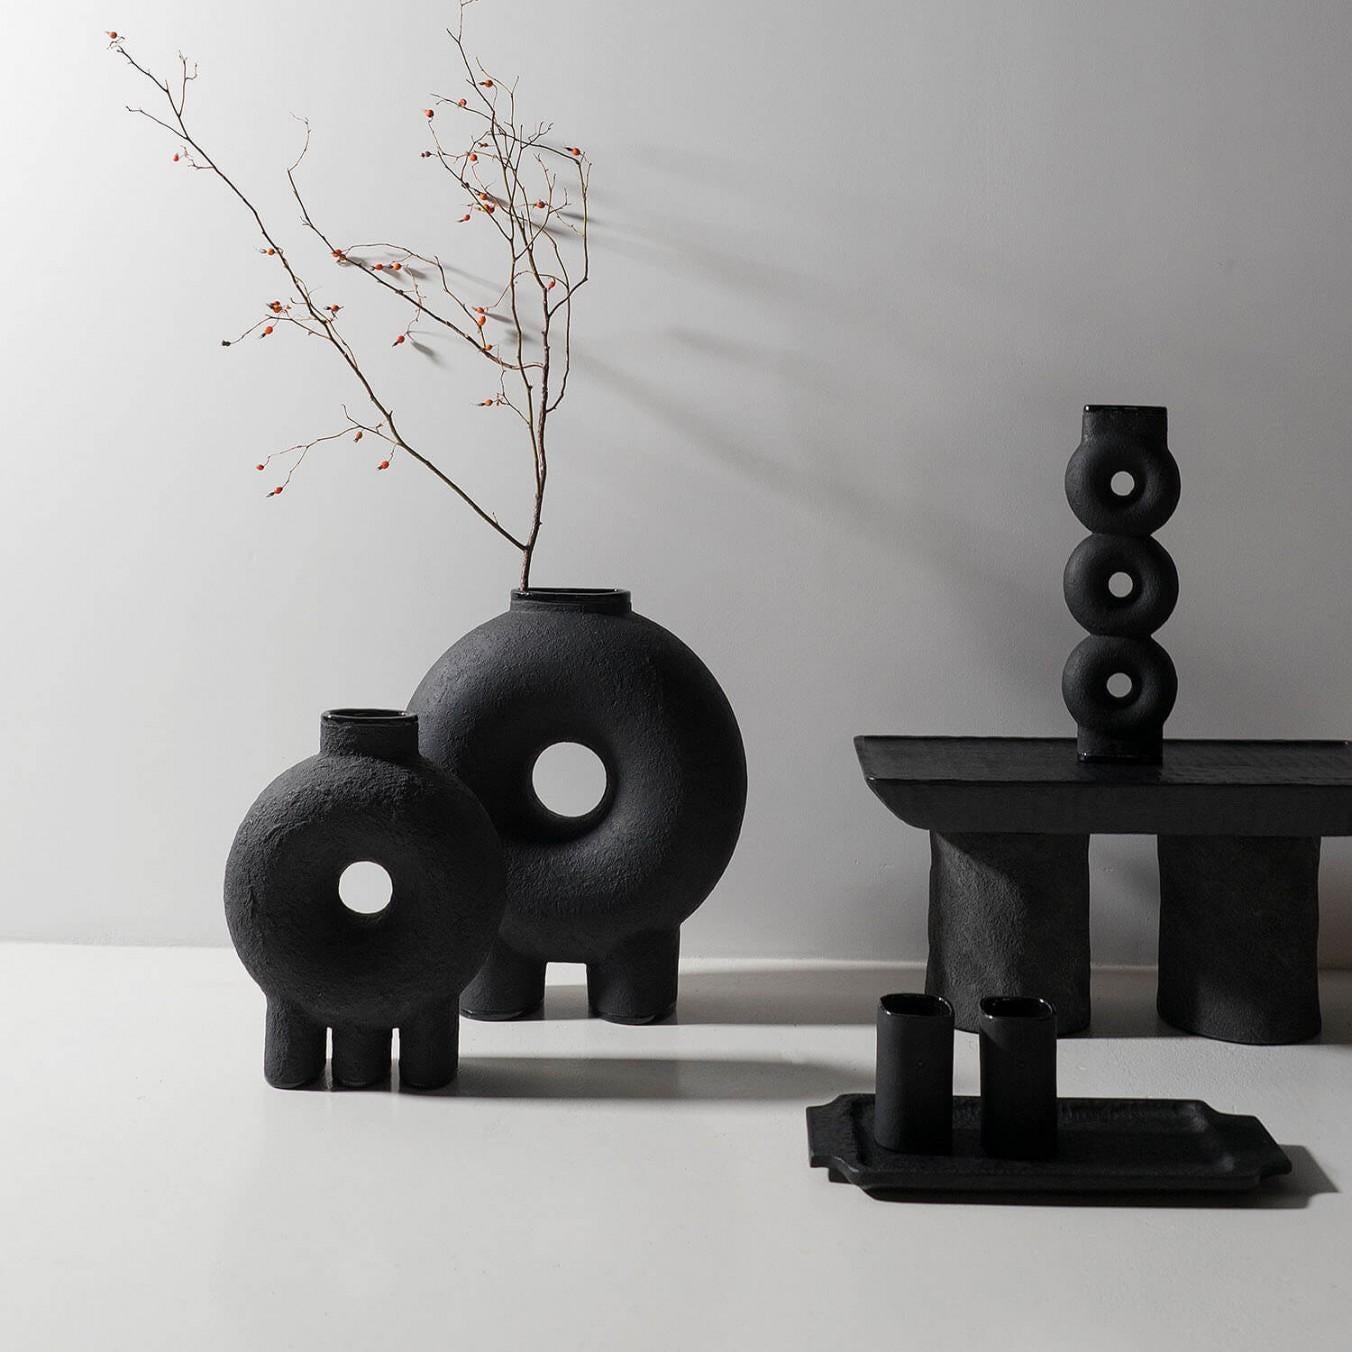 Contemporary Black Sculpted Black Ceramic Vase, Kumanec Two Leg Vase by Faina In New Condition For Sale In Warsaw, PL